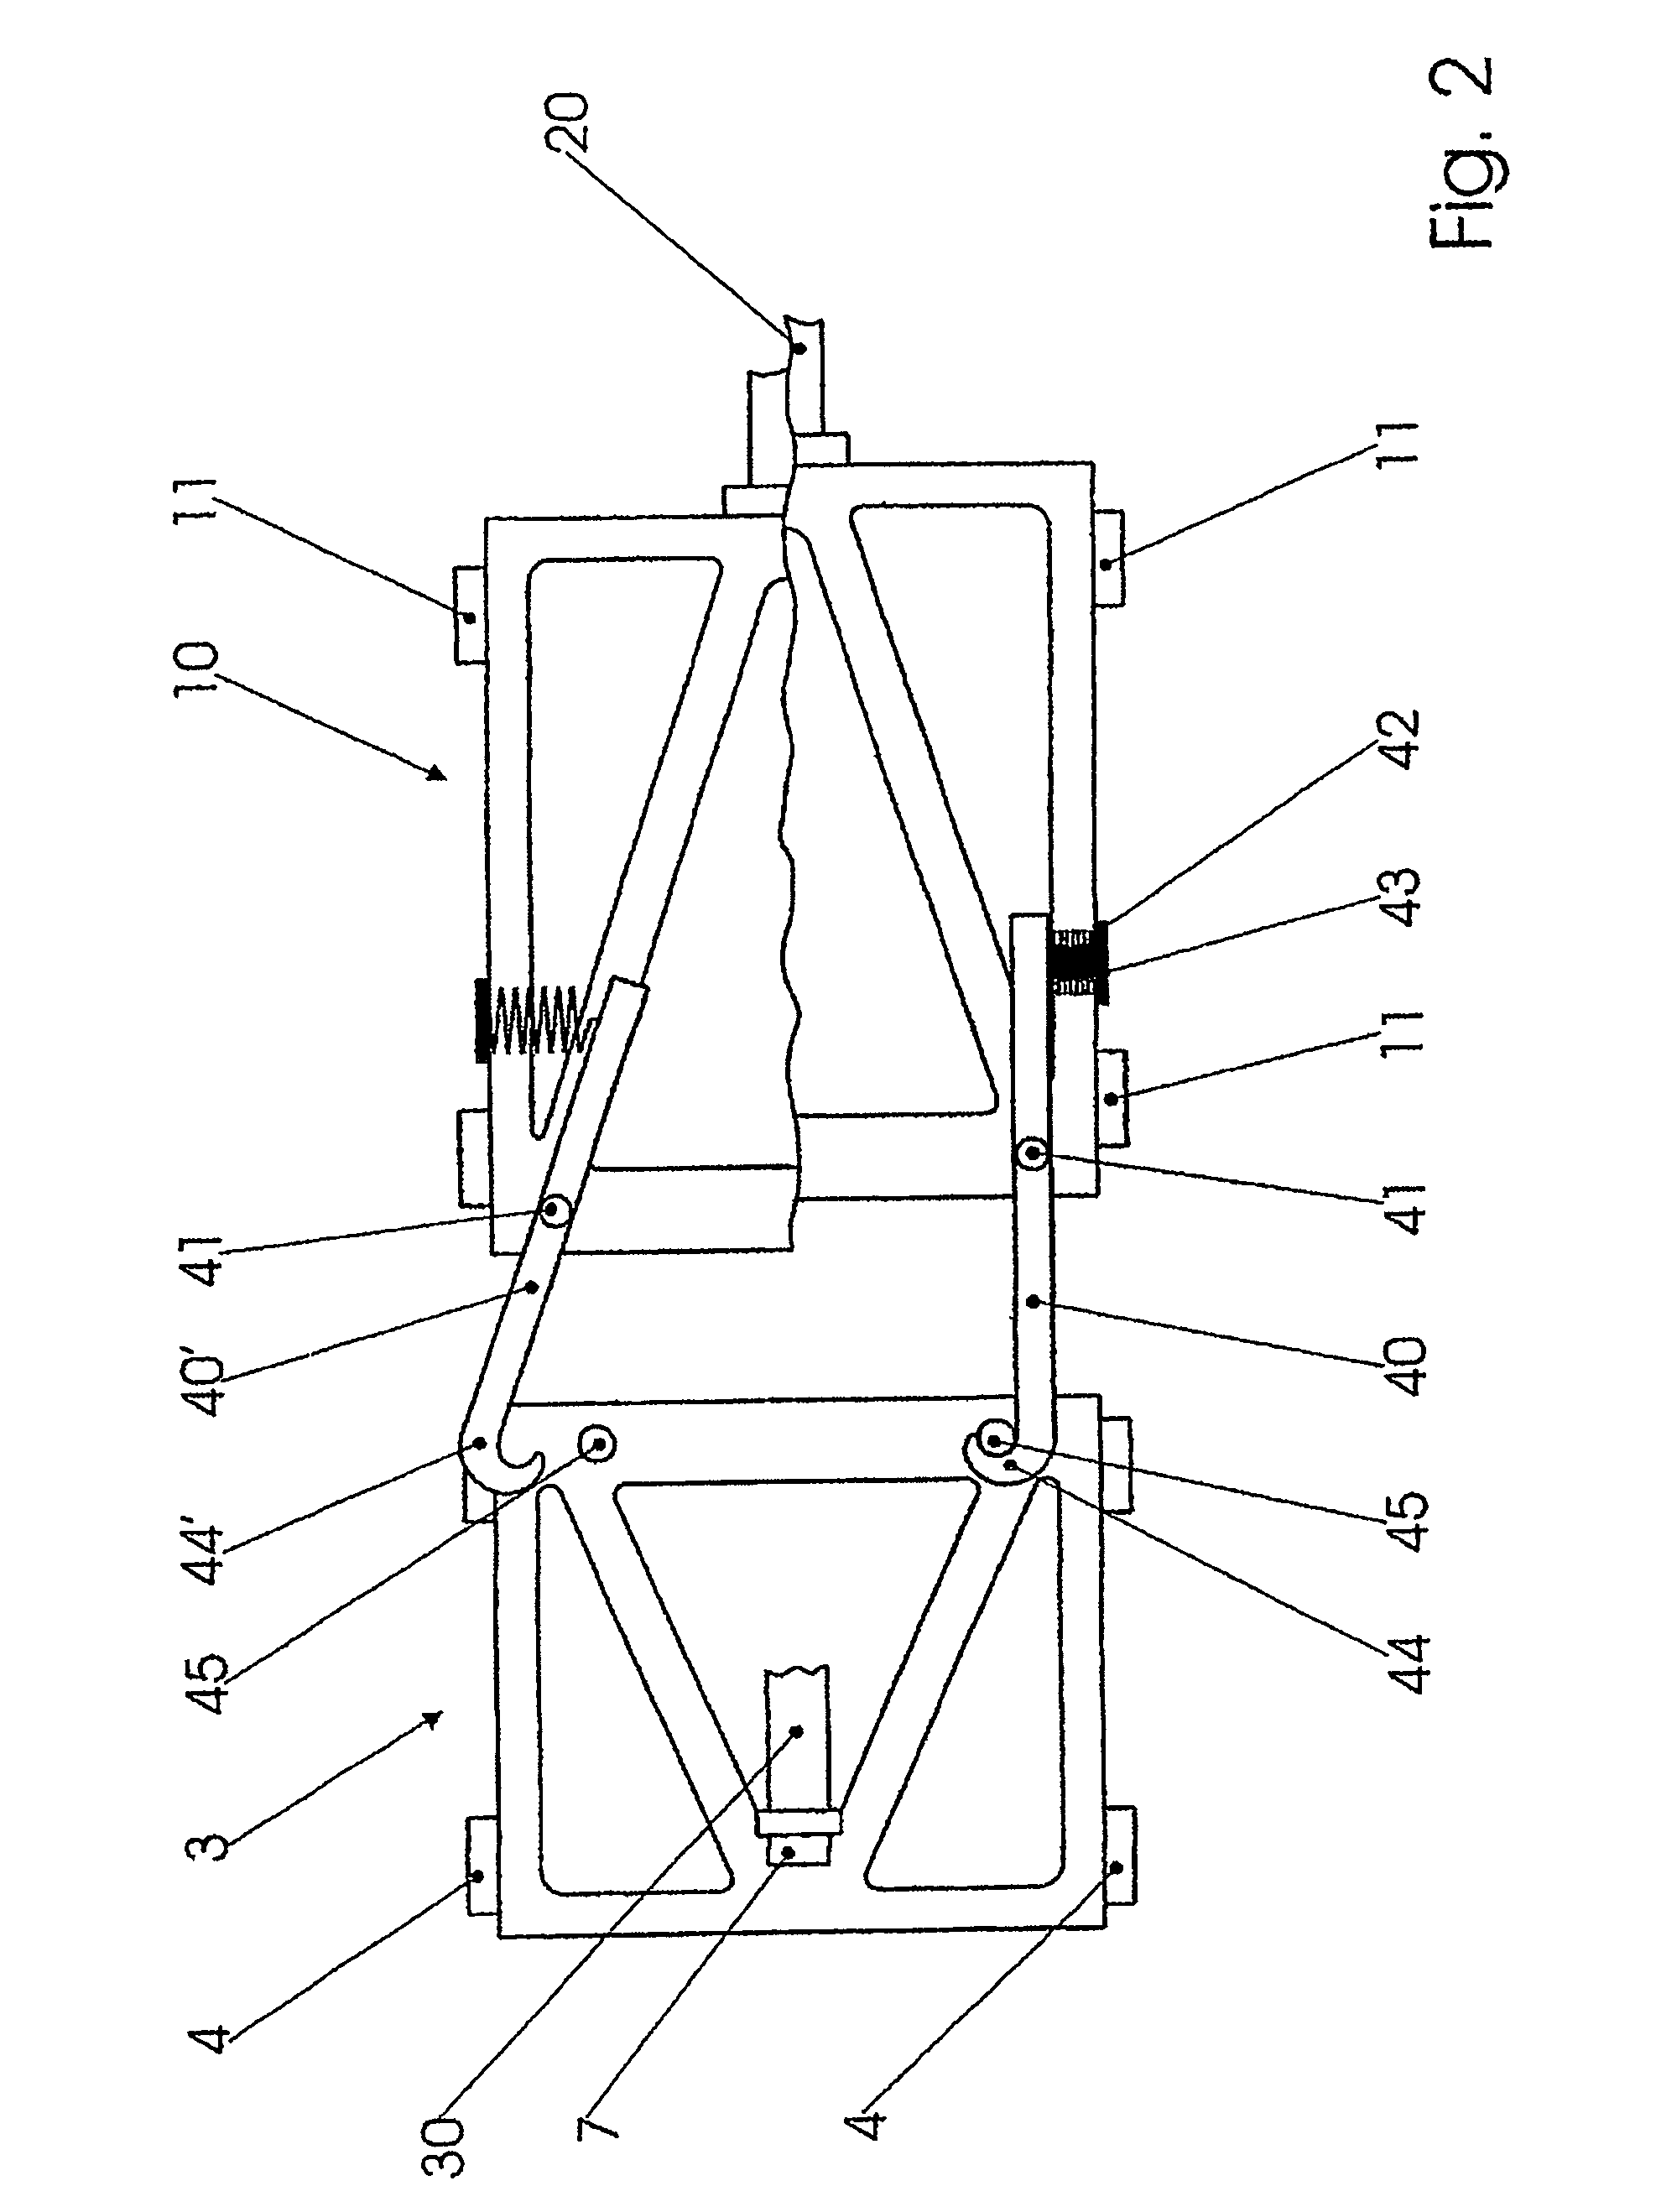 Device for simulating a side collision of a motor vehicle